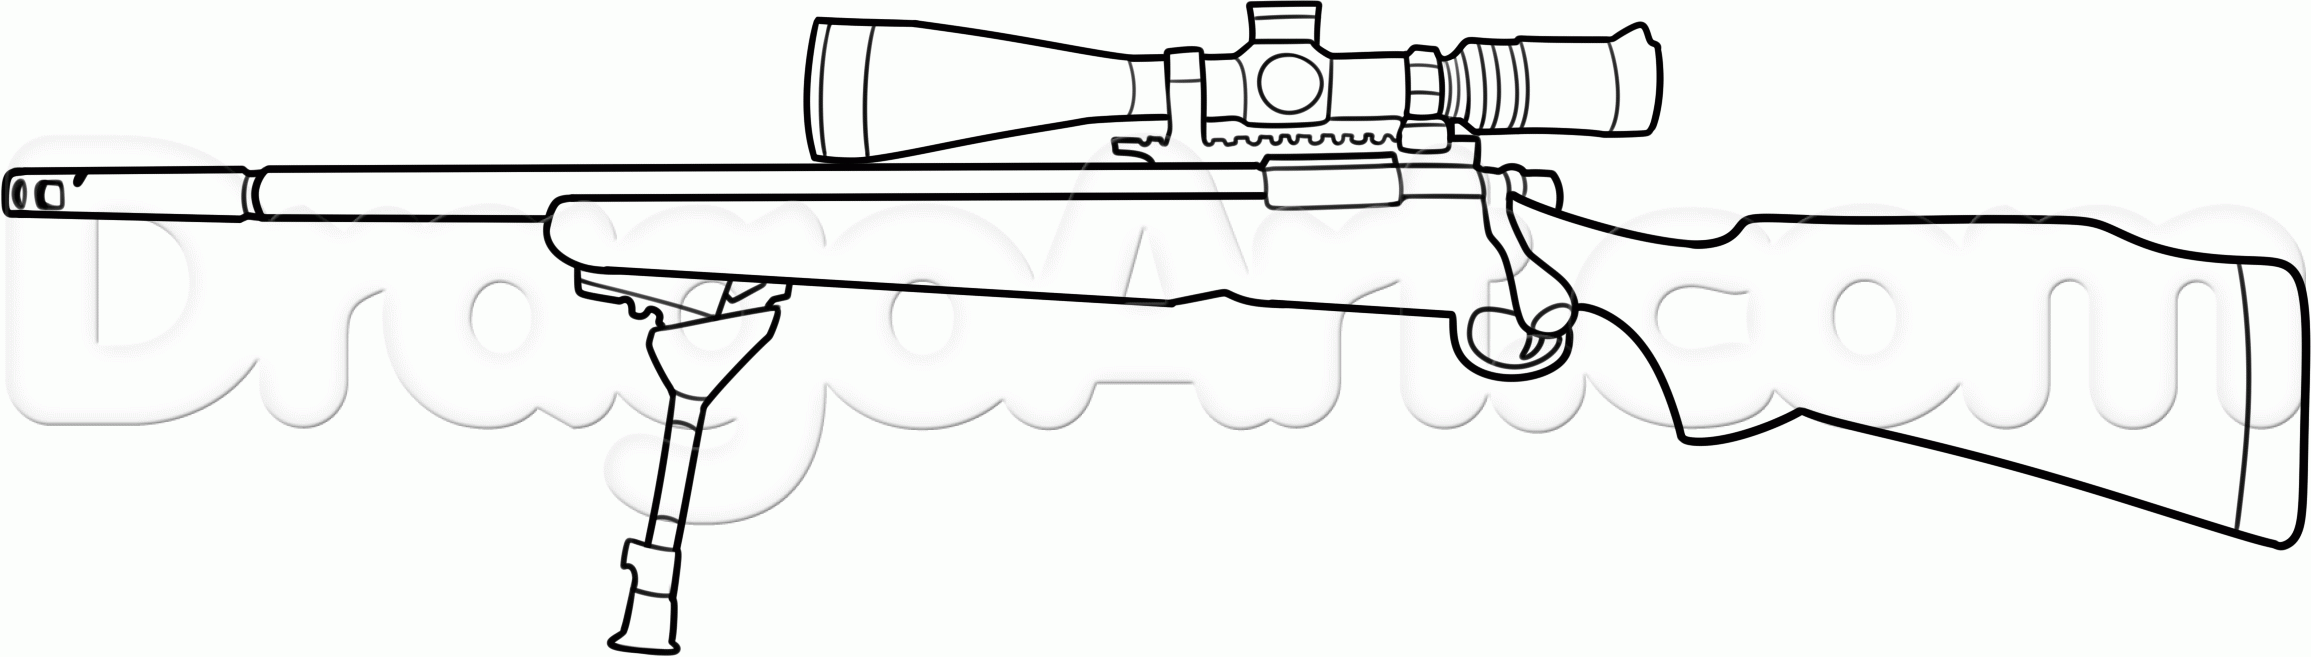 how-to-draw-a-sniper-rifle-step-10_1_000000167602_5